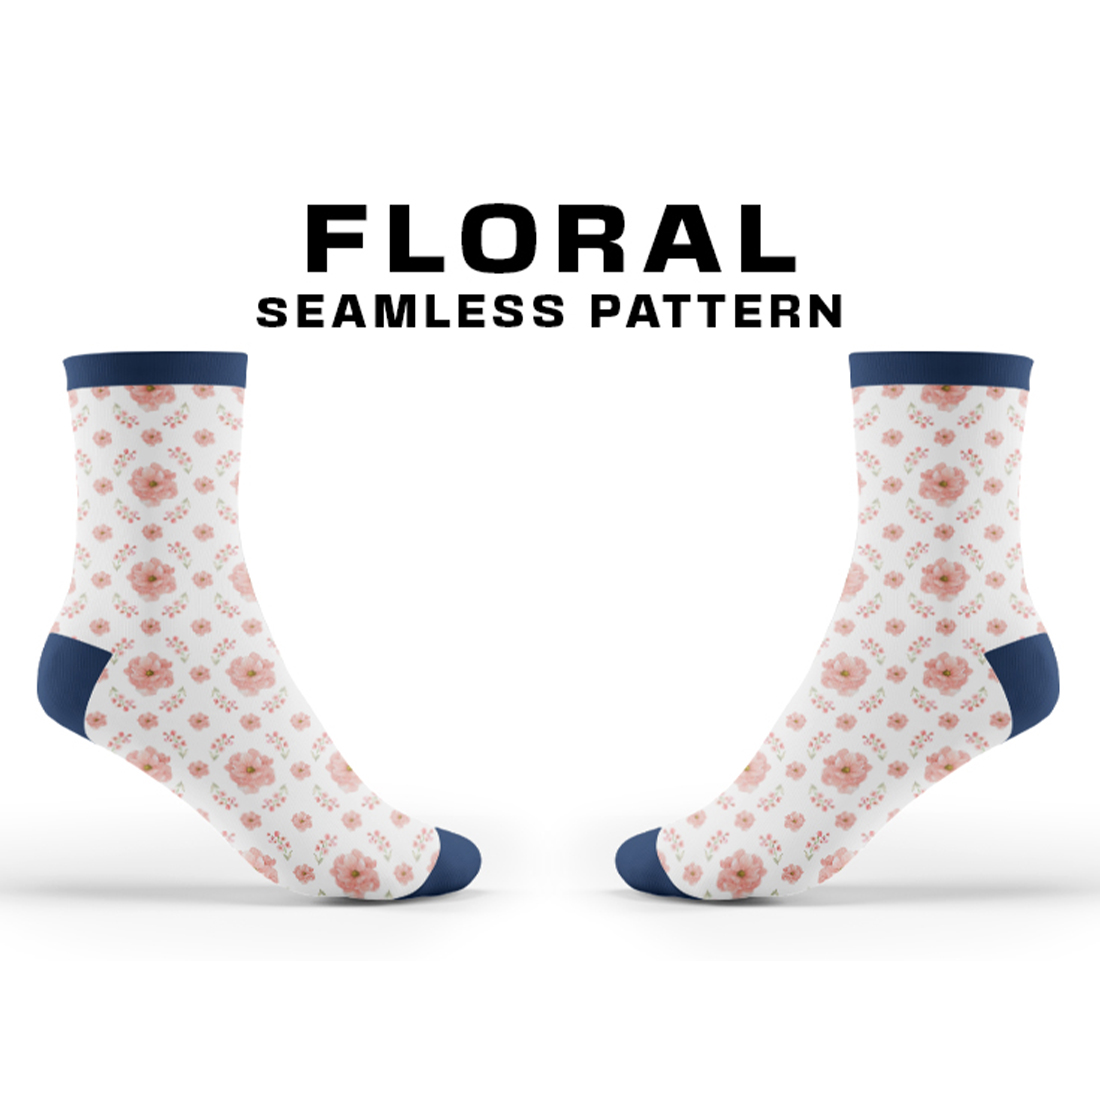 Picture of a sock with charming flower patterns